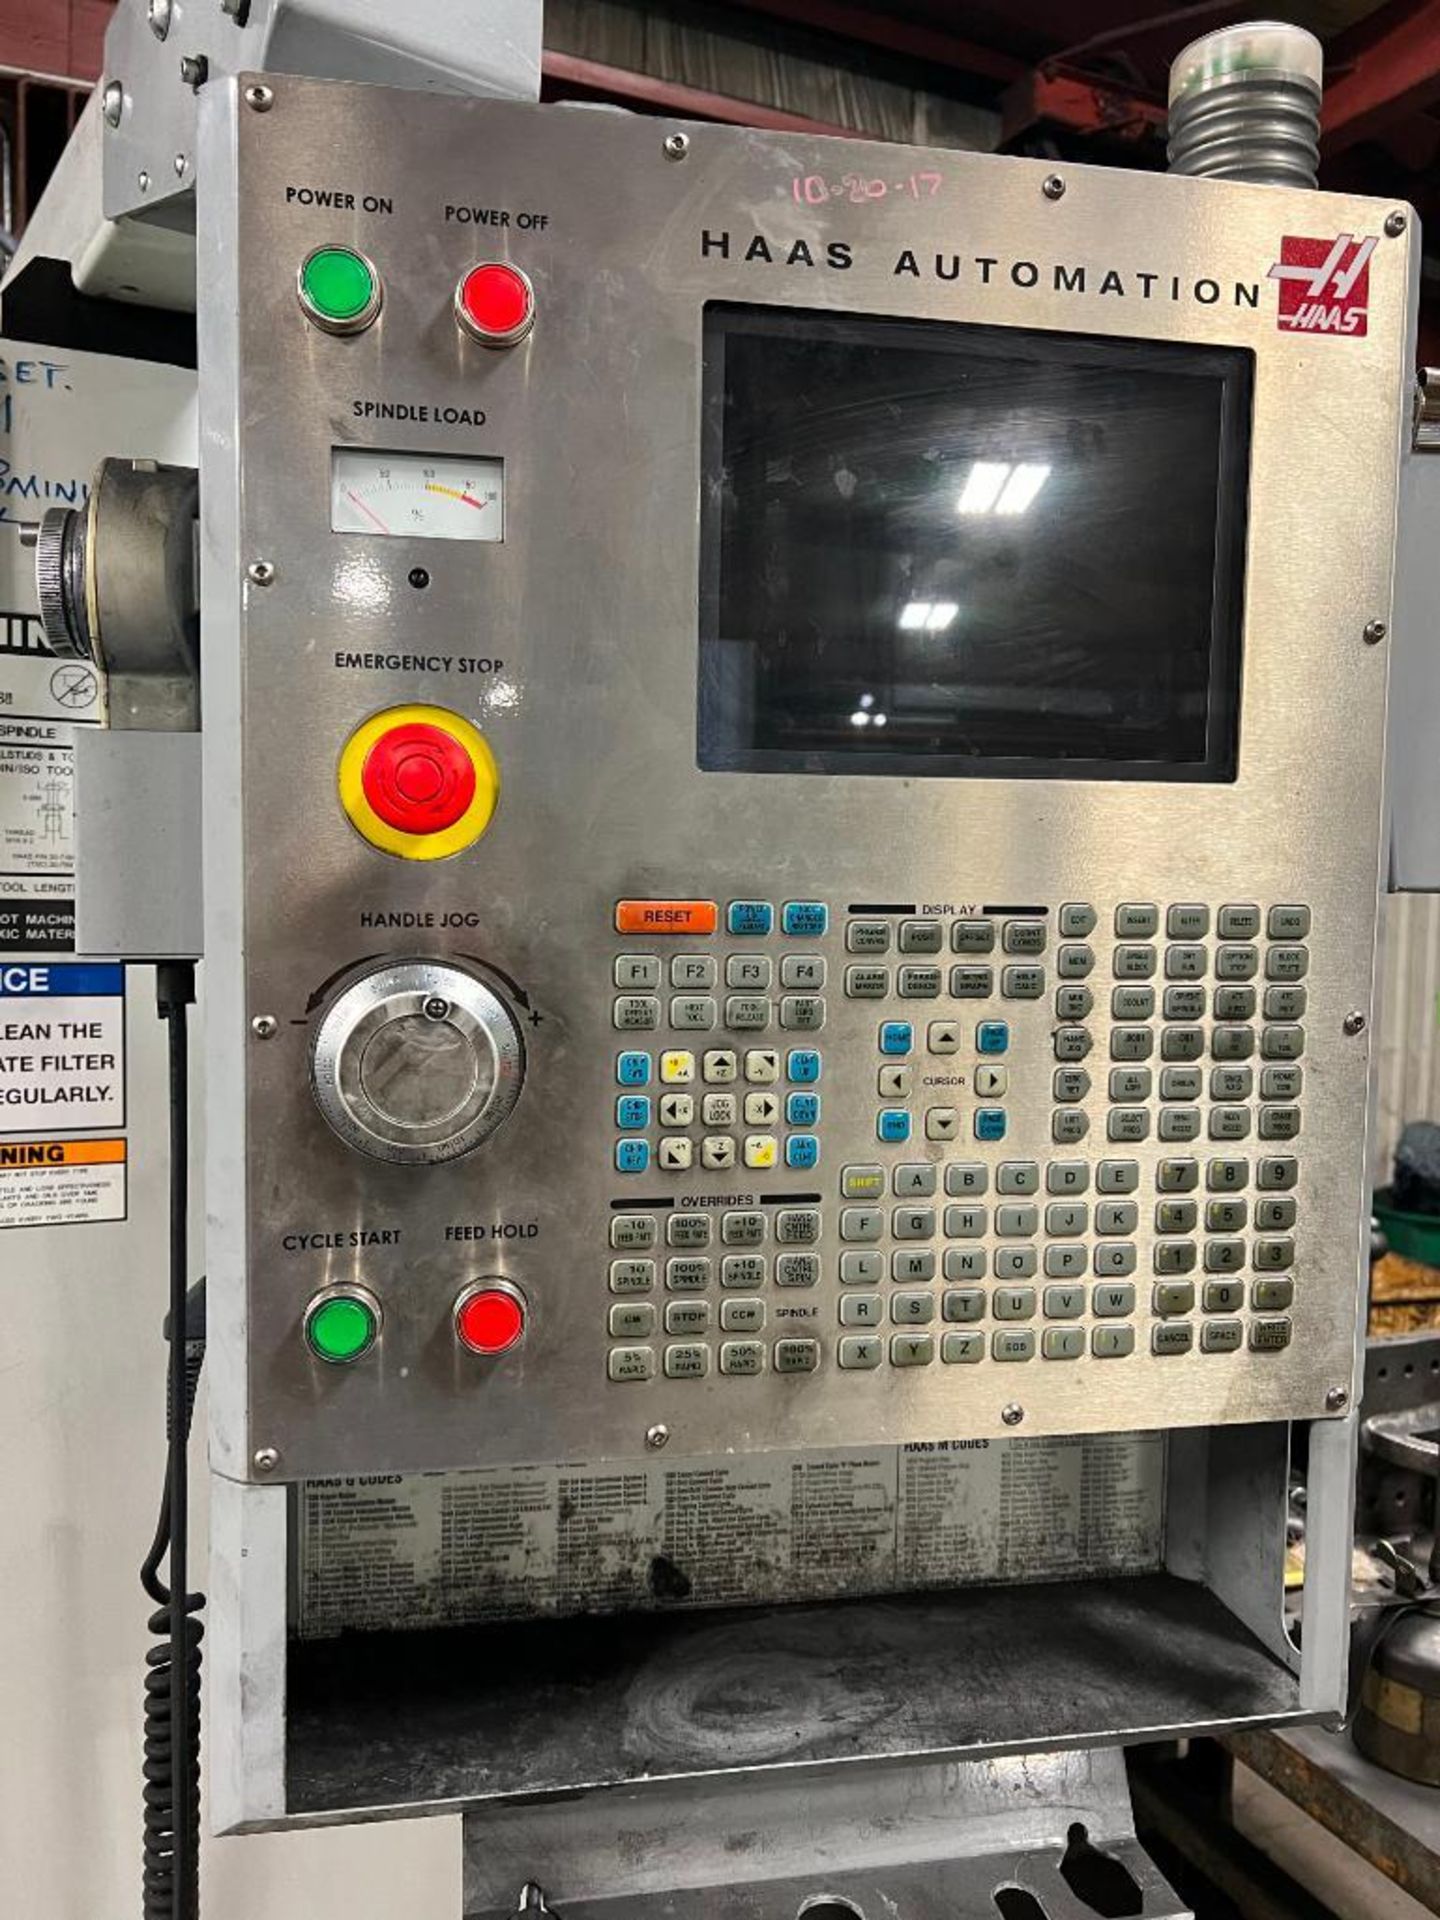 2004 Haas Super VF2 VF-2SS 3-Axis Cnc Vertical Machining Center - Image 2 of 10